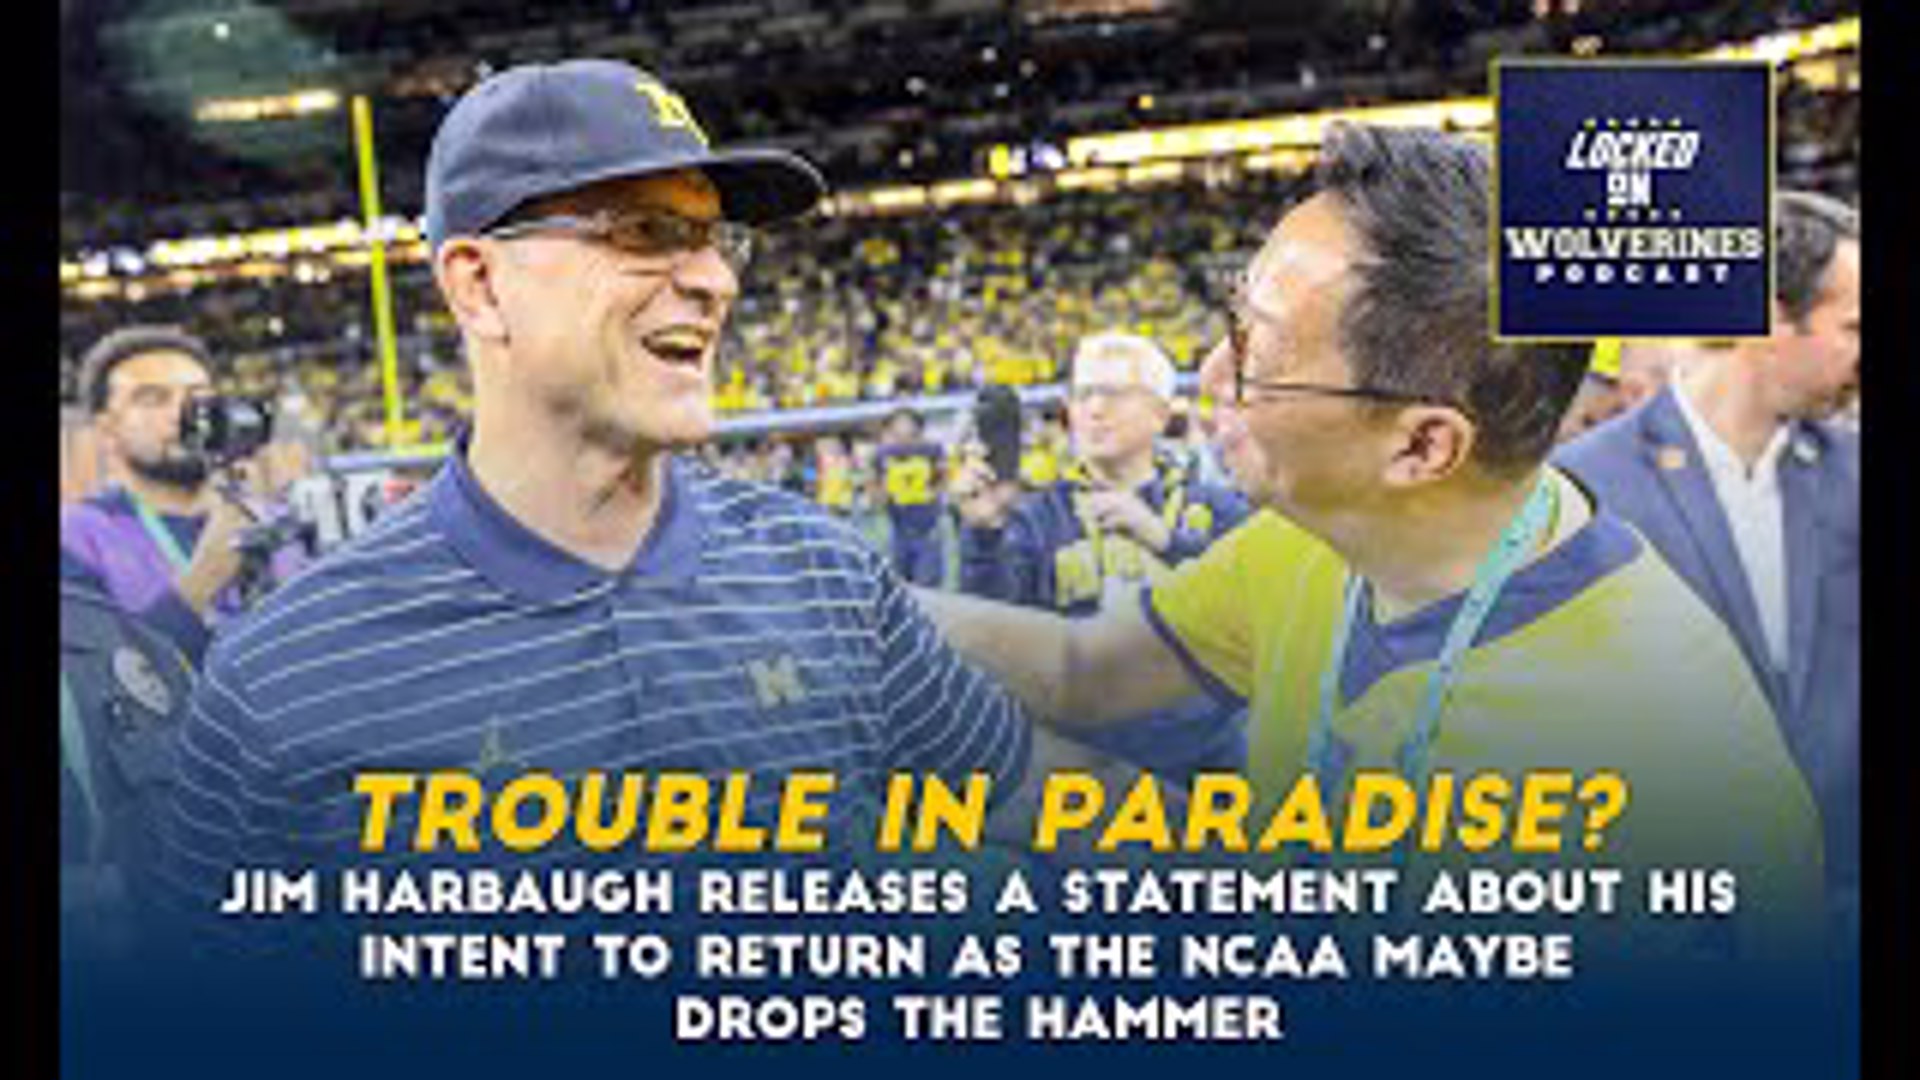 The NCAA is reportedly investigating the Wolverines for recruiting violations, and because of that Harbaugh may be in hot water as NFL rumors swirl.